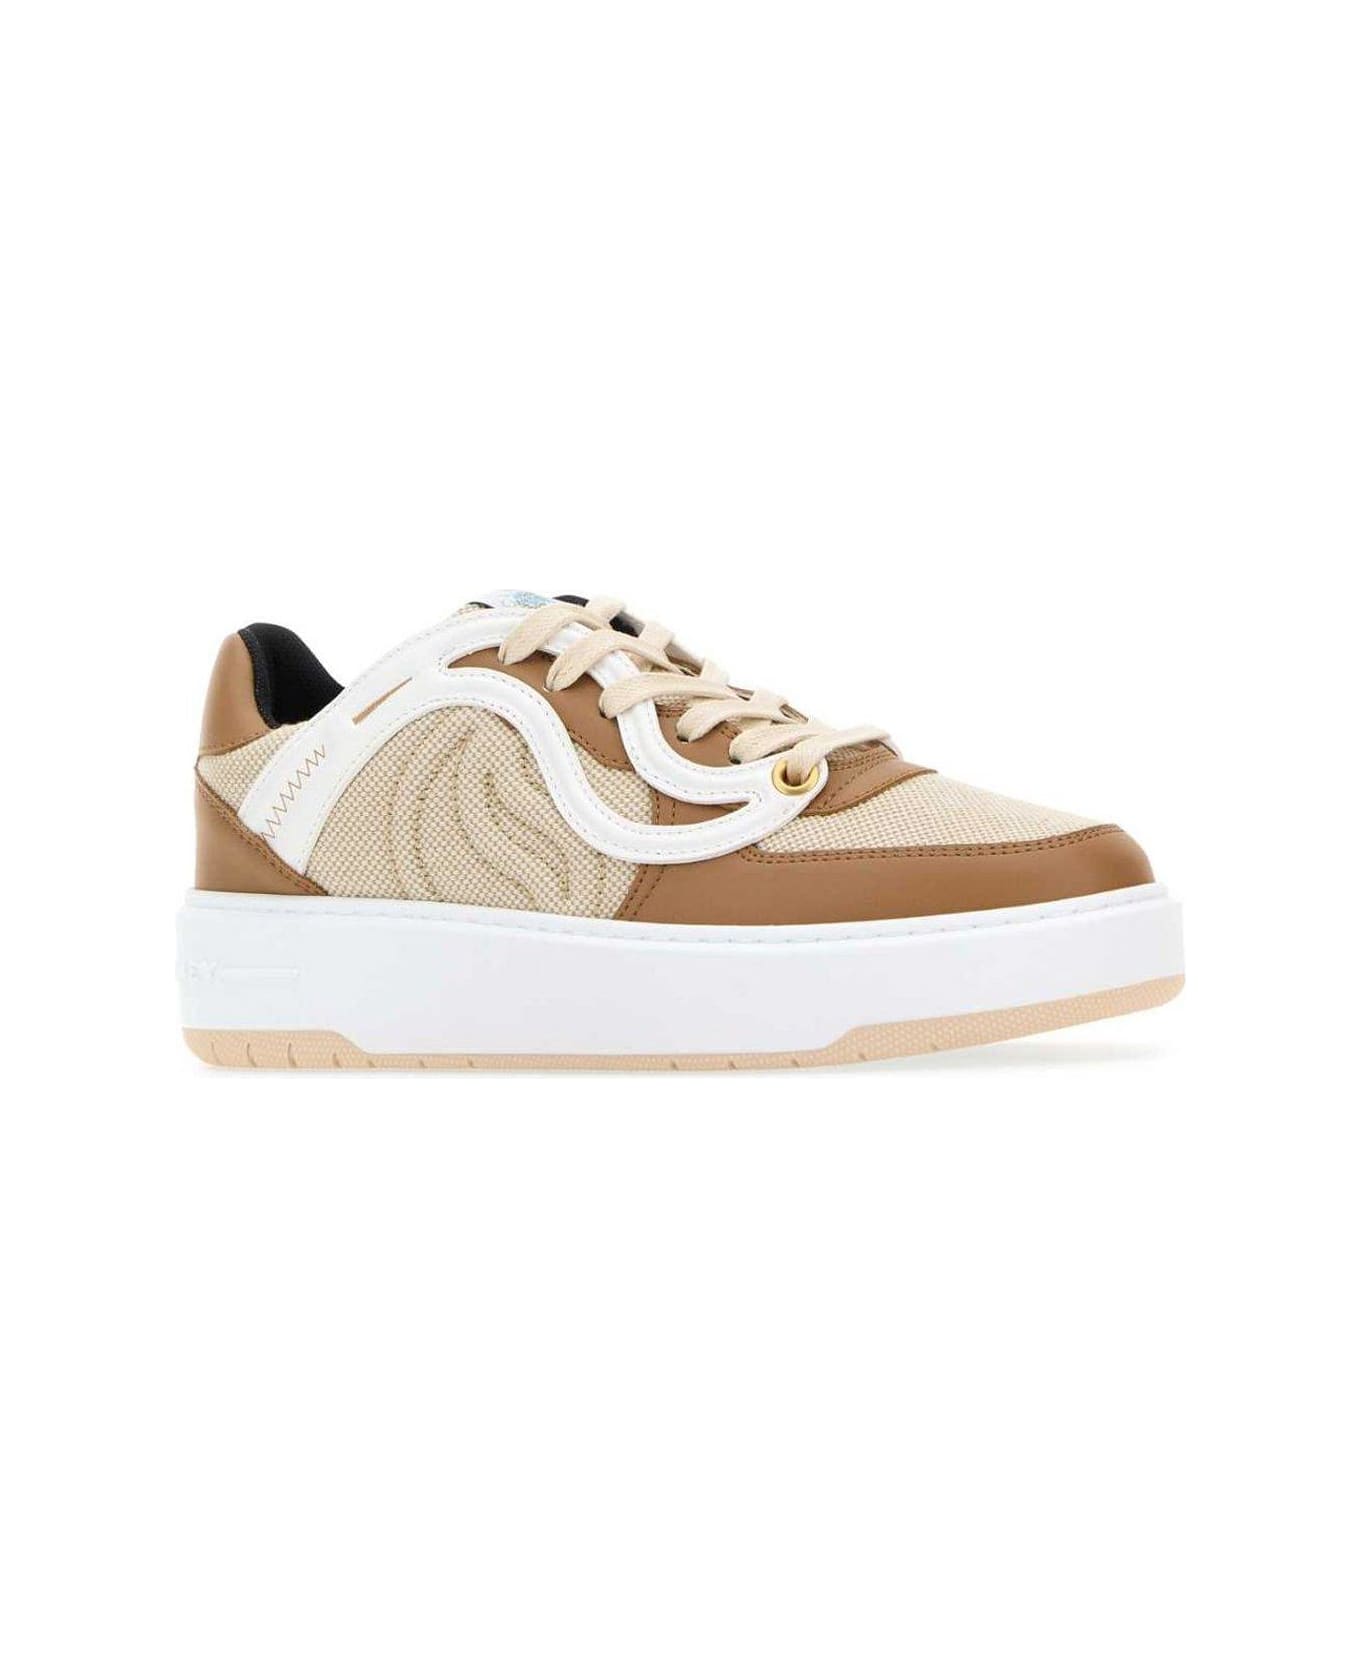 Stella McCartney S-wave 1 Low-top Sneakers - White ウェッジシューズ